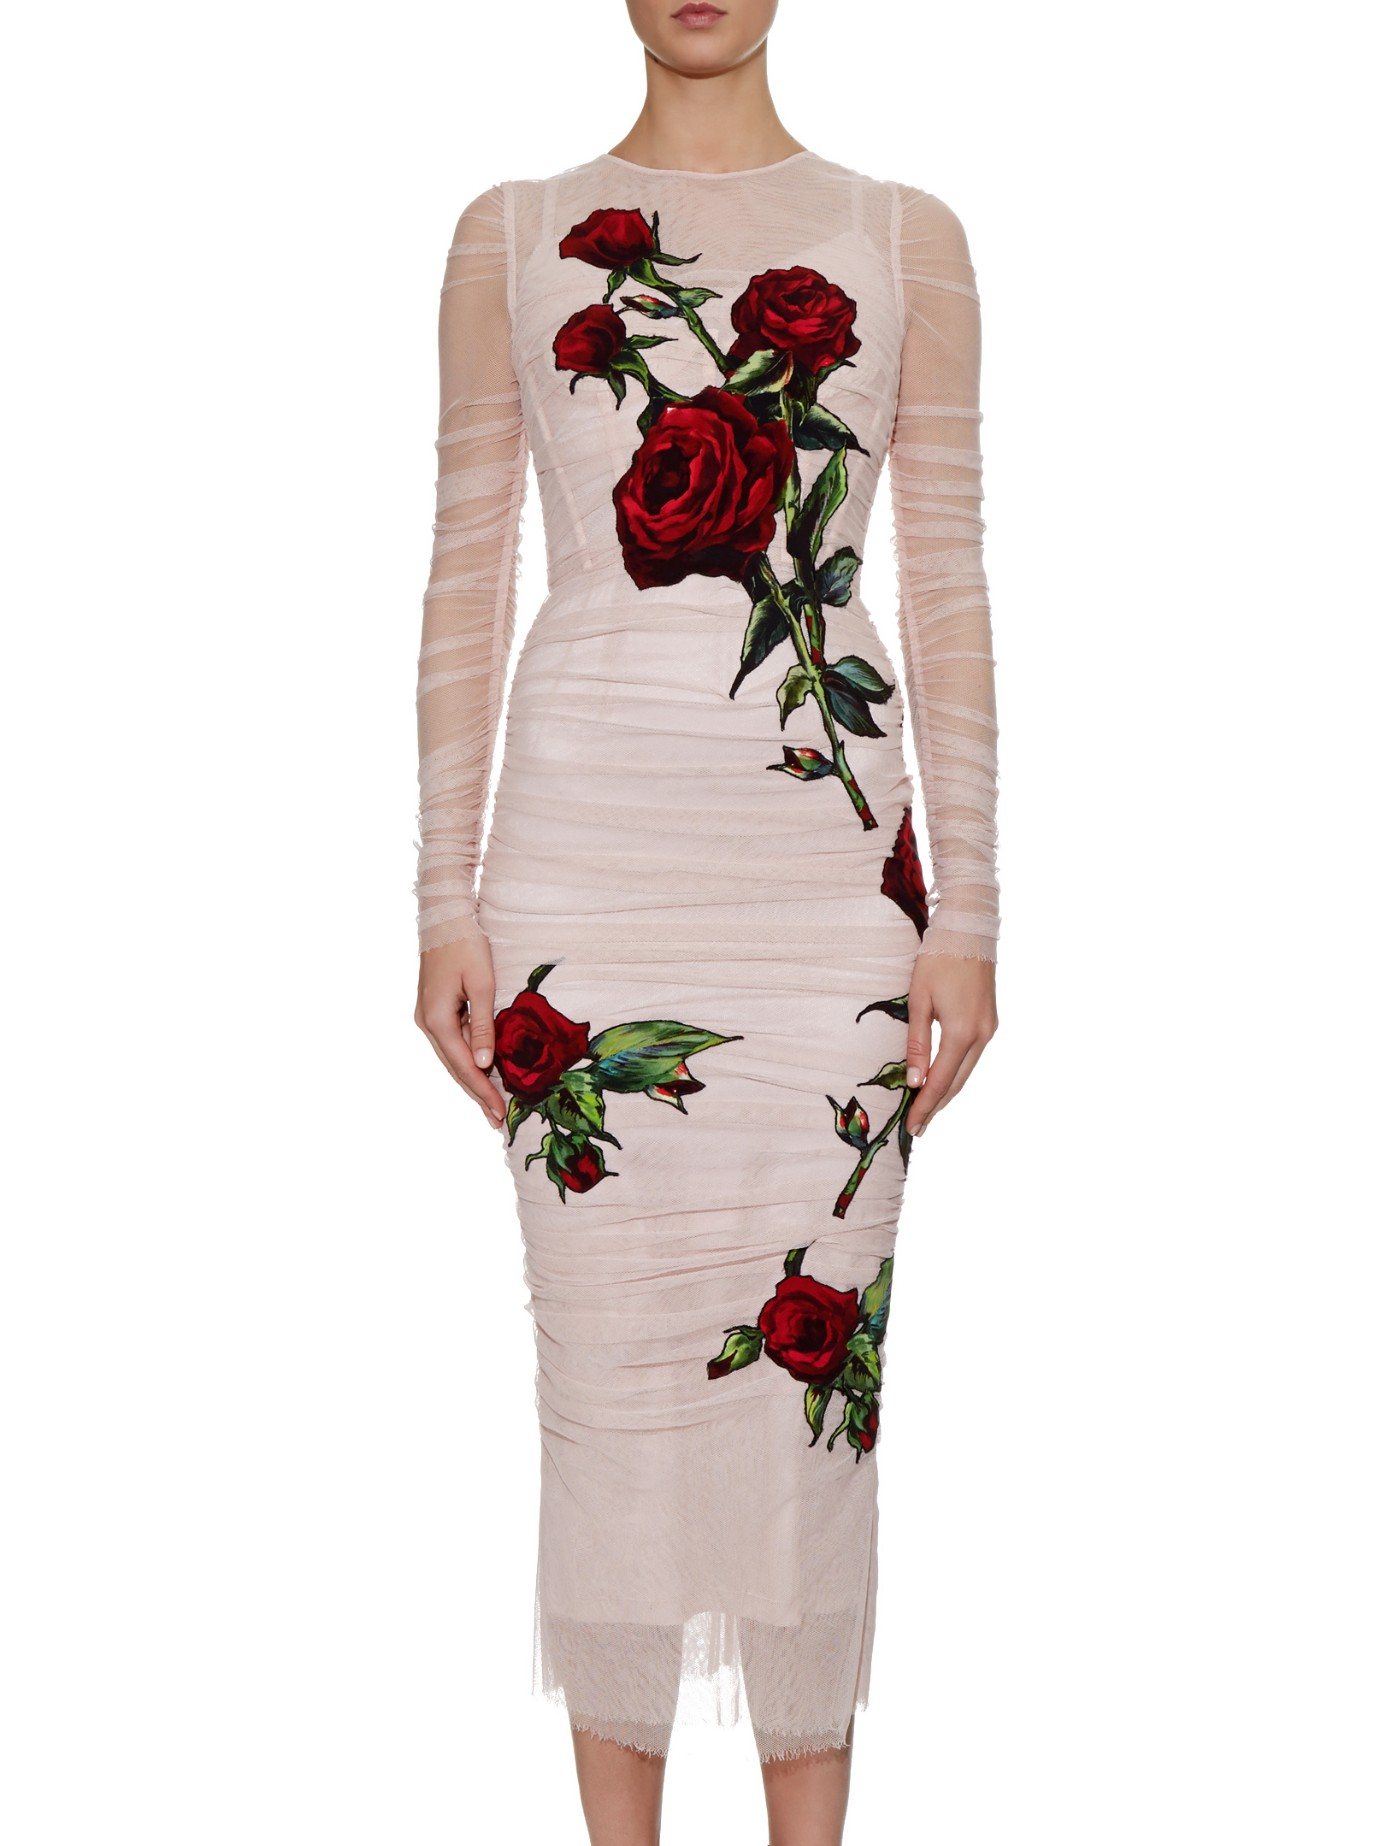 Lyst - Dolce & Gabbana Rose-embroidered Tulle Dress in Pink